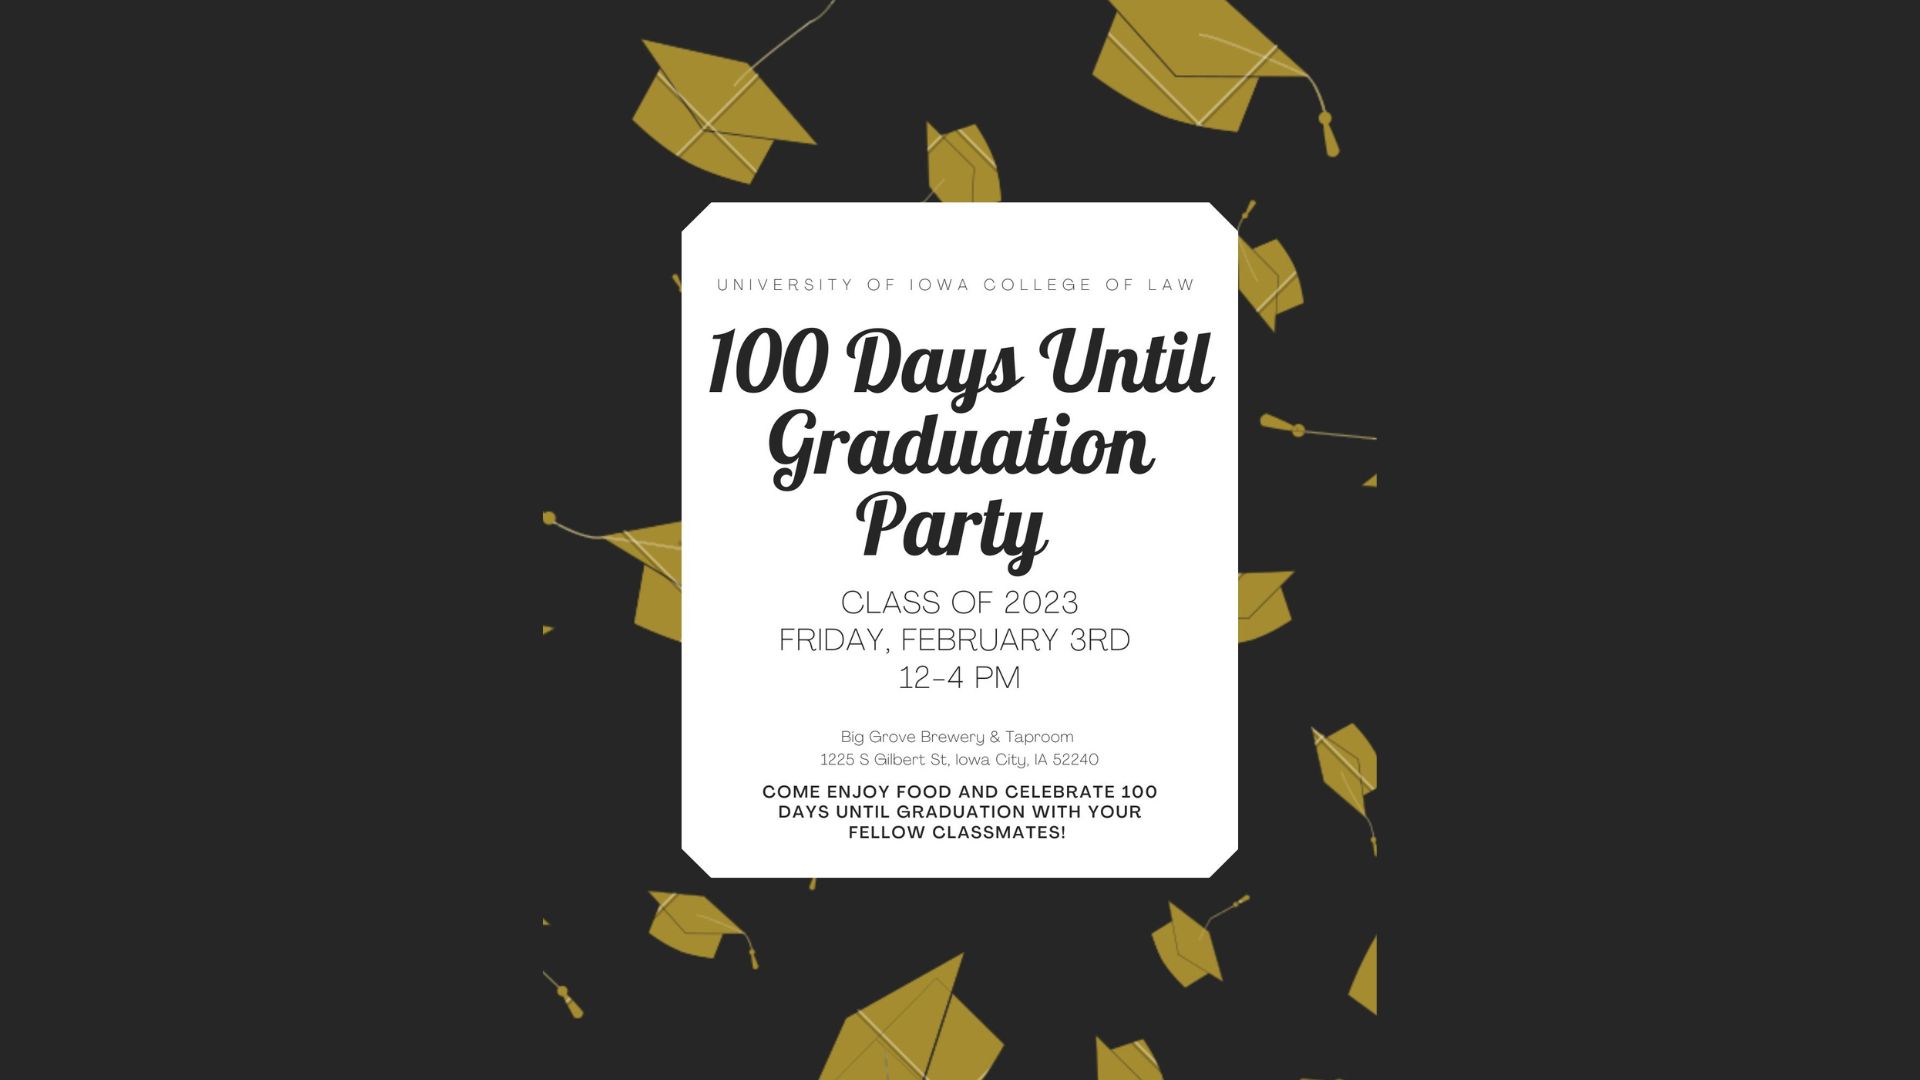  Calling all 2023 Graduates!        Please join your class at Big Grove on Friday, February 3rd from 12-4 pm to celebrate there being only 100 days left until graduation. There will be lots of food and a cash bar so come hungry and ready to celebrate!